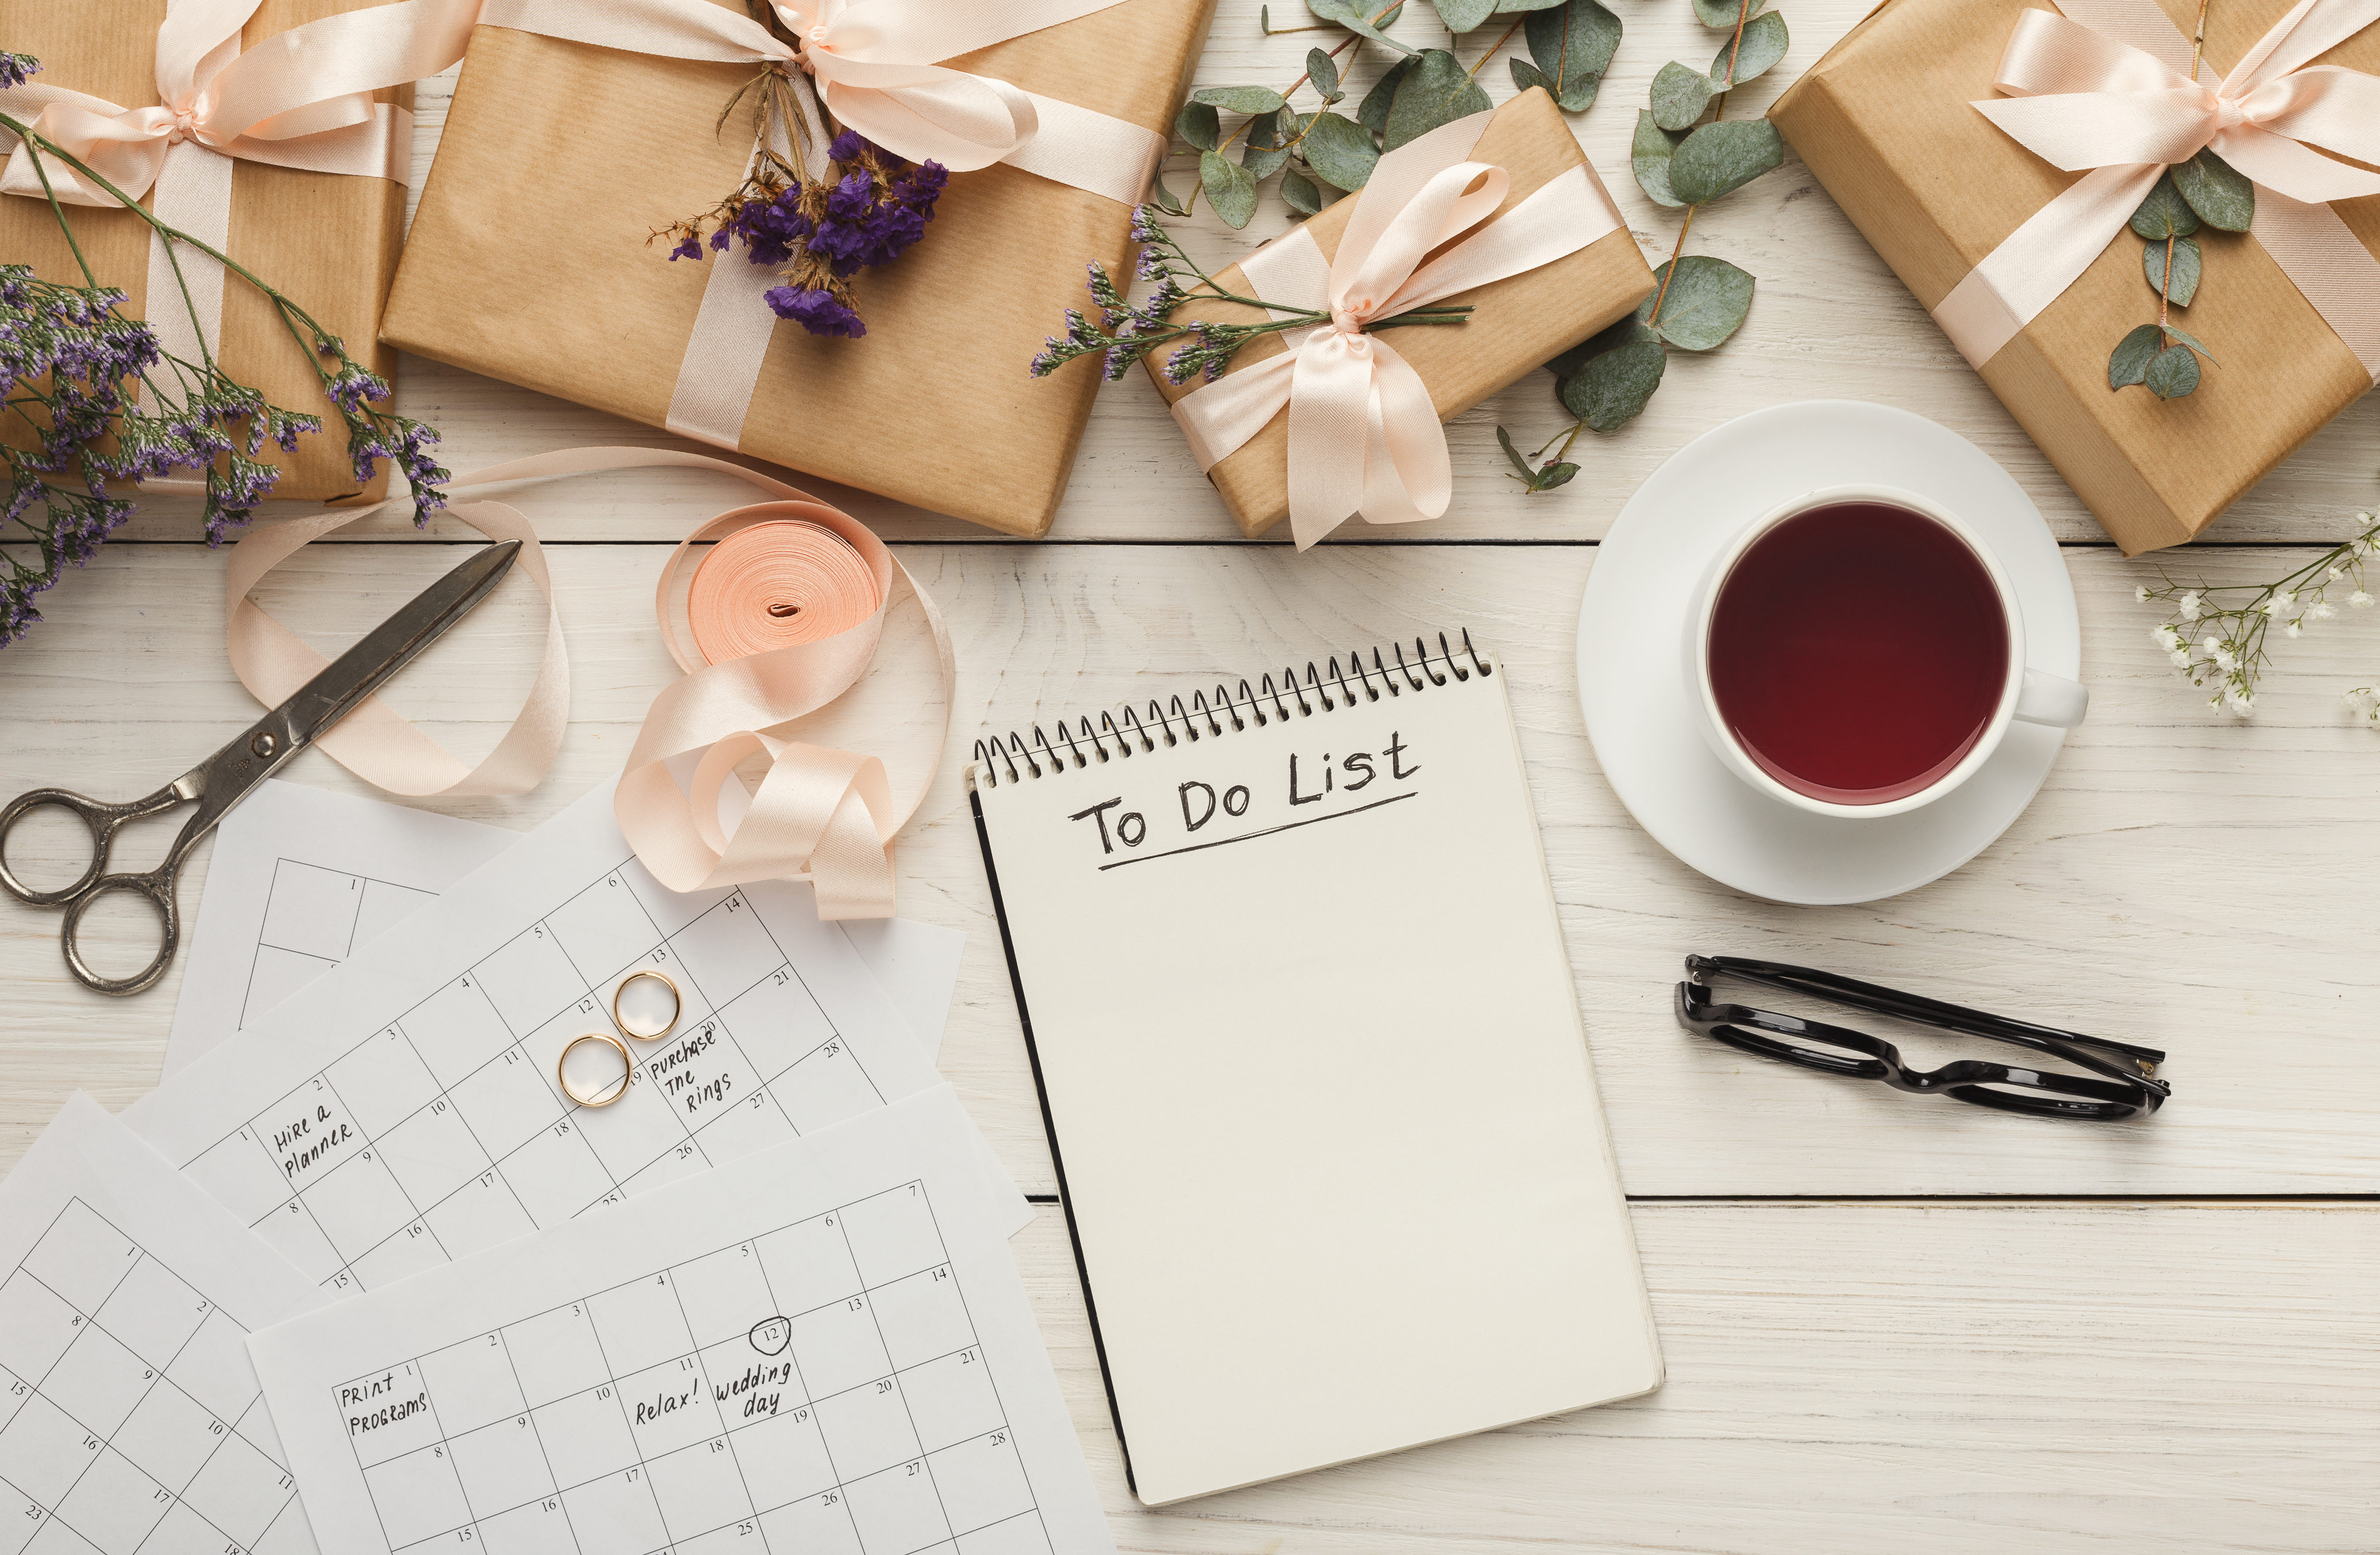 Papers and wedding paraphernalia scattered on a table, along with a cup of coffee, a pair of eyeglasses, and a notebook with the words "To Do List" scribbled on the first page | Source: Shutterstock